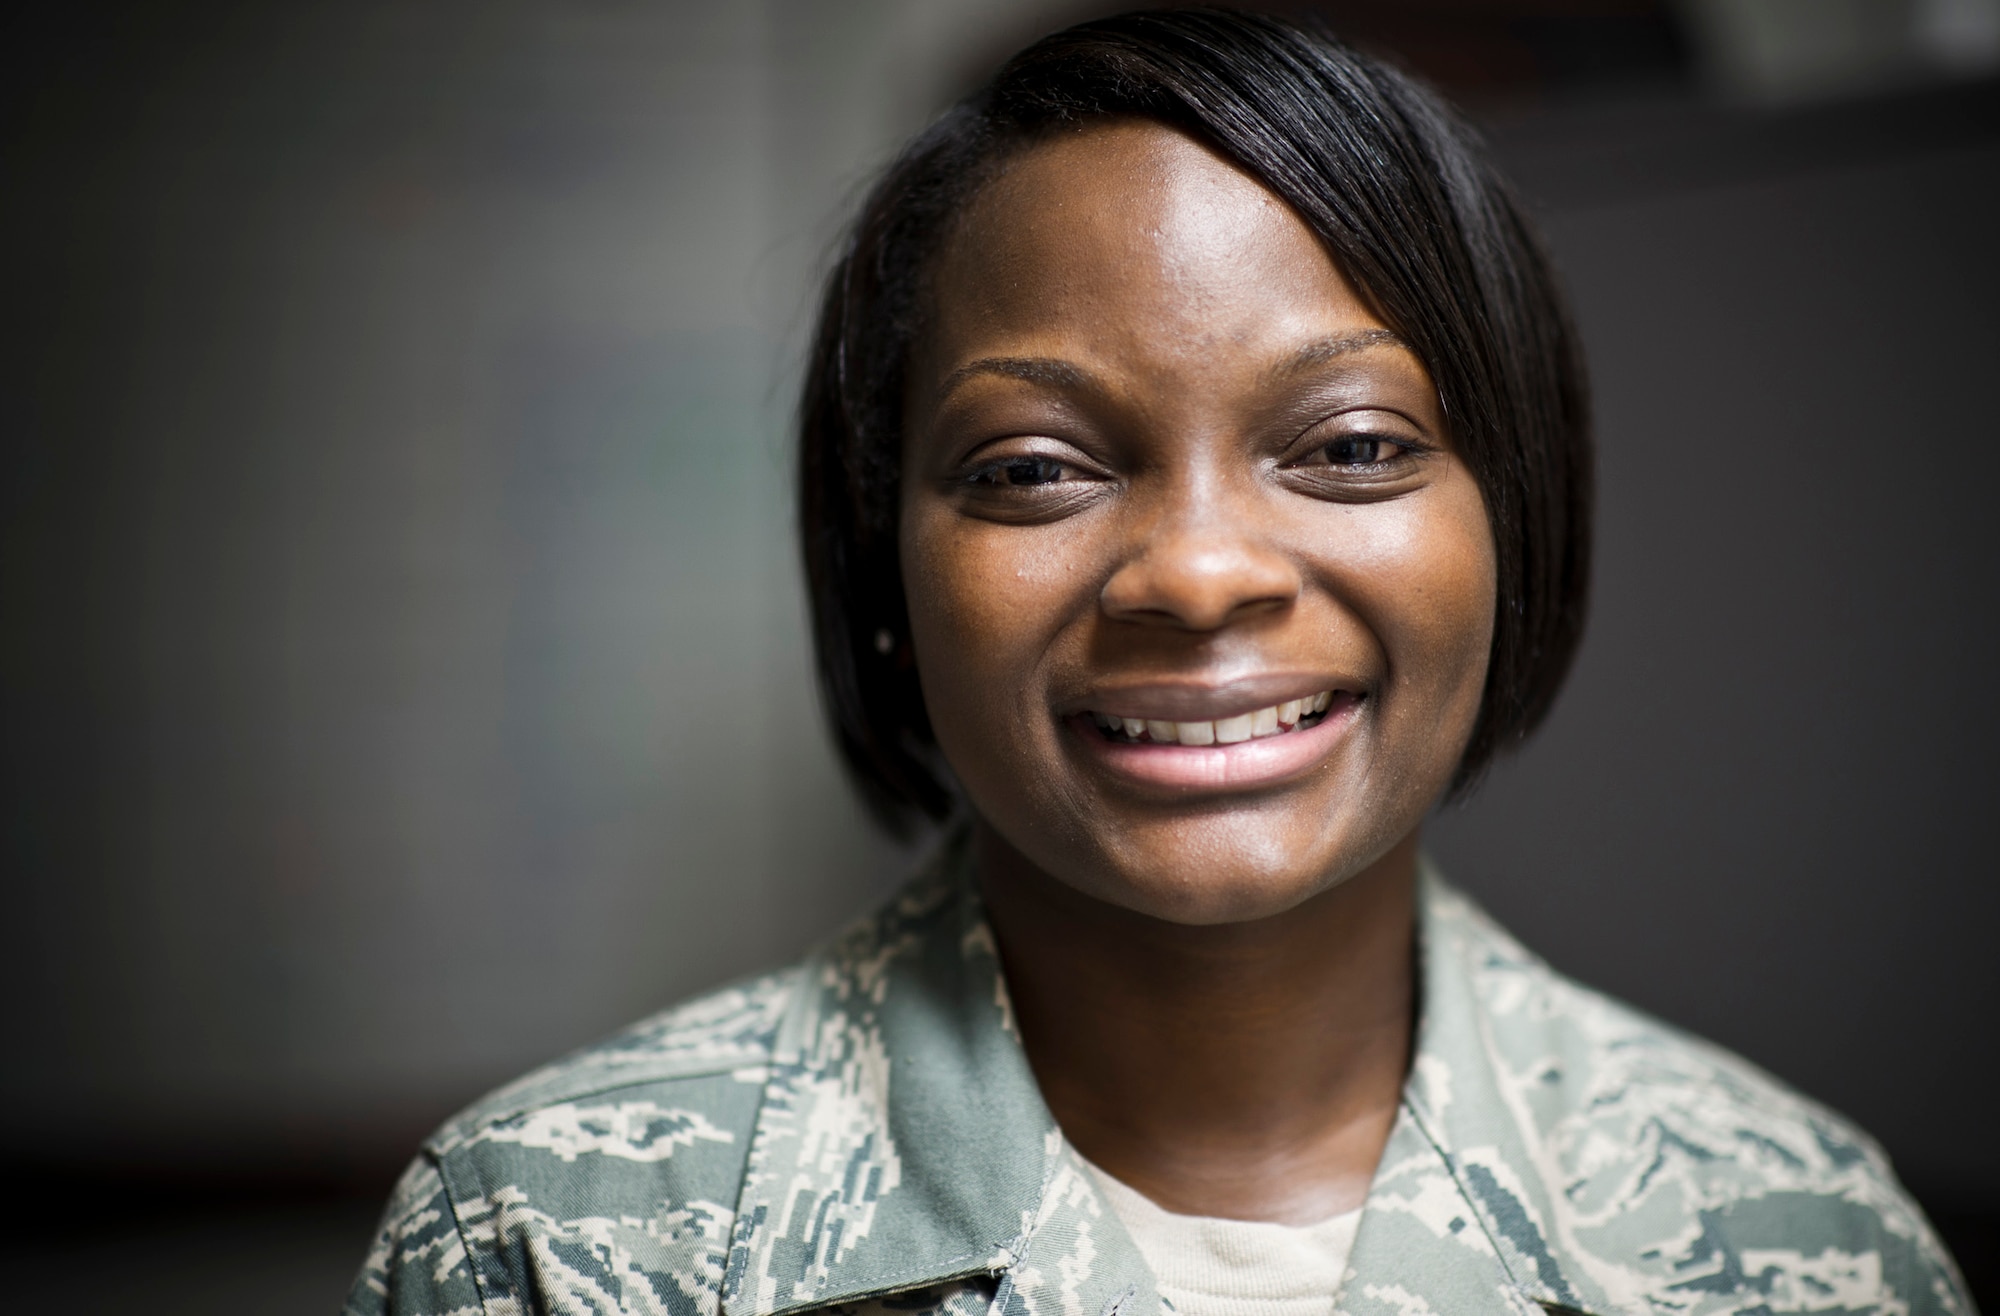 Staff Sgt. Raven Taylor, 374th Medical Operations Squadron medical technician, smiles for a photo at Yokota Air Base, Japan, July 8, 2011. In 2011, Taylor was selected as one of the 12 Outstanding Airmen of the Year. She became a focal point for enlisted affairs and worked to improve the Air Force as a whole with Chief Master Sgt. James Roy, then-chief master sergeant of the Air Force.(U.S. Air Force photo/Staff Sgt. Samuel Morse)